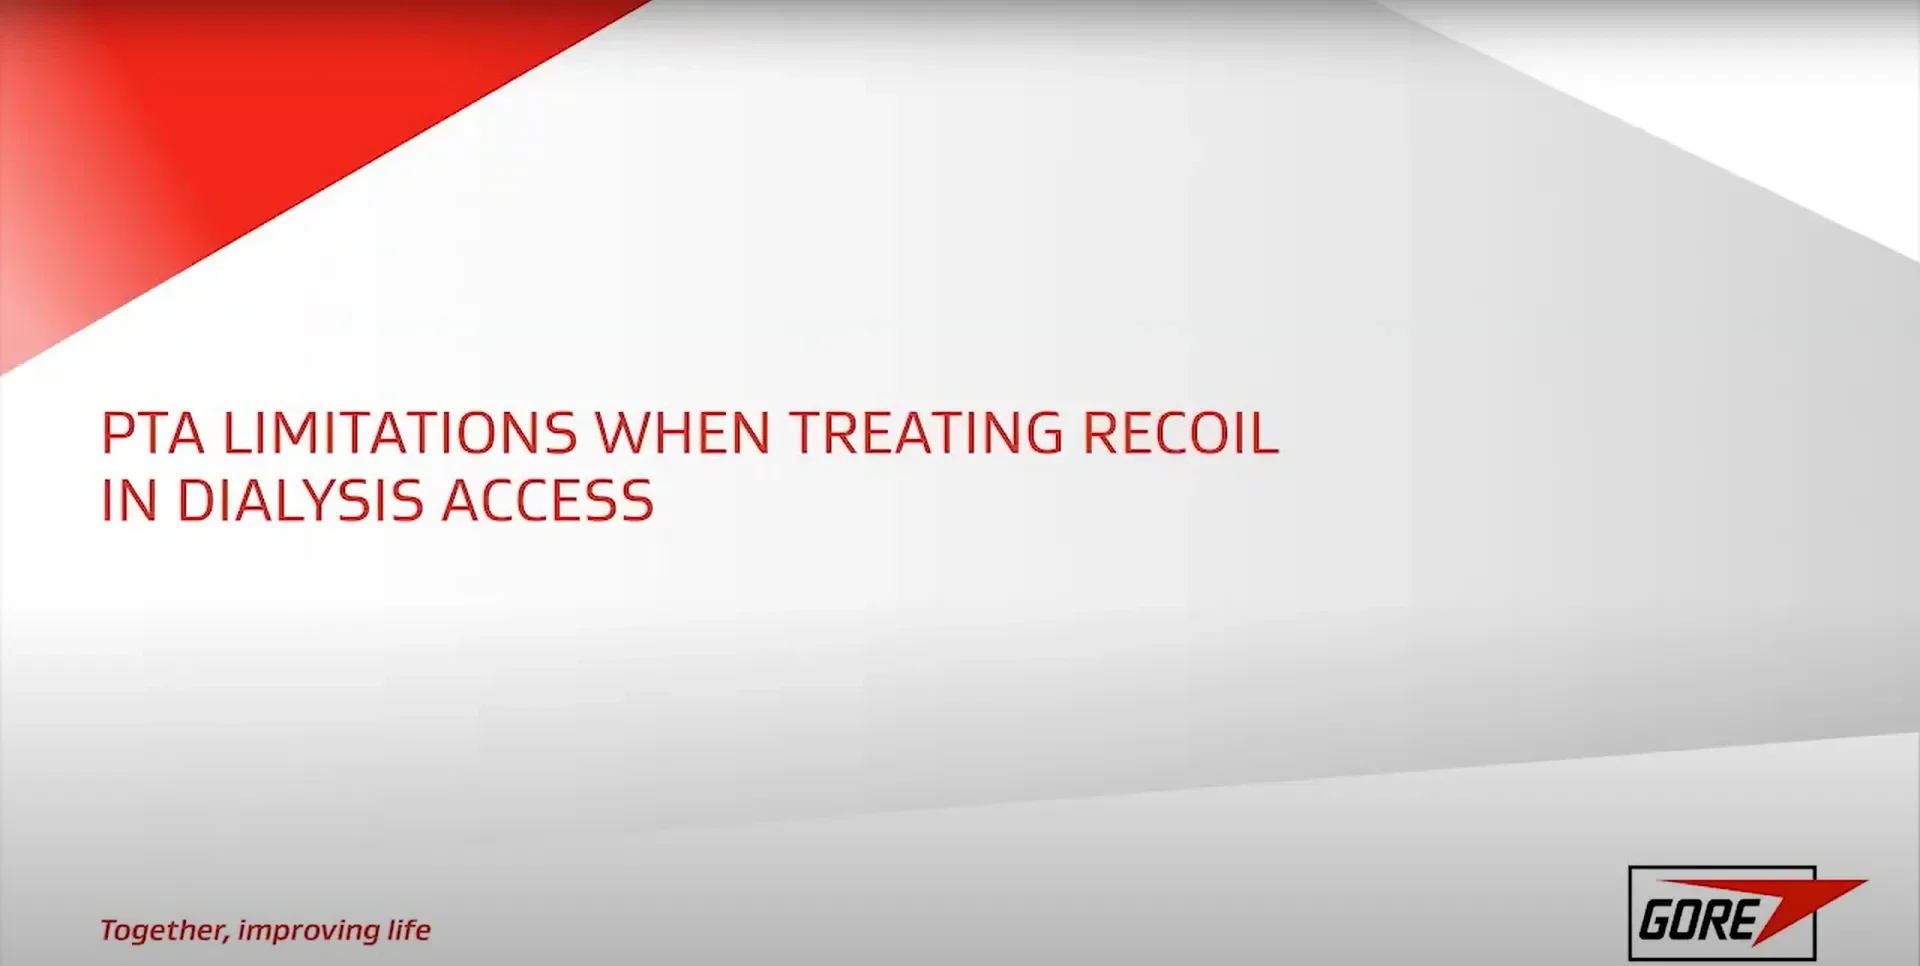  Drs. Lok, Garcia, Patel and Saad discuss limitations of PTA when treating recoil in dialysis access. 